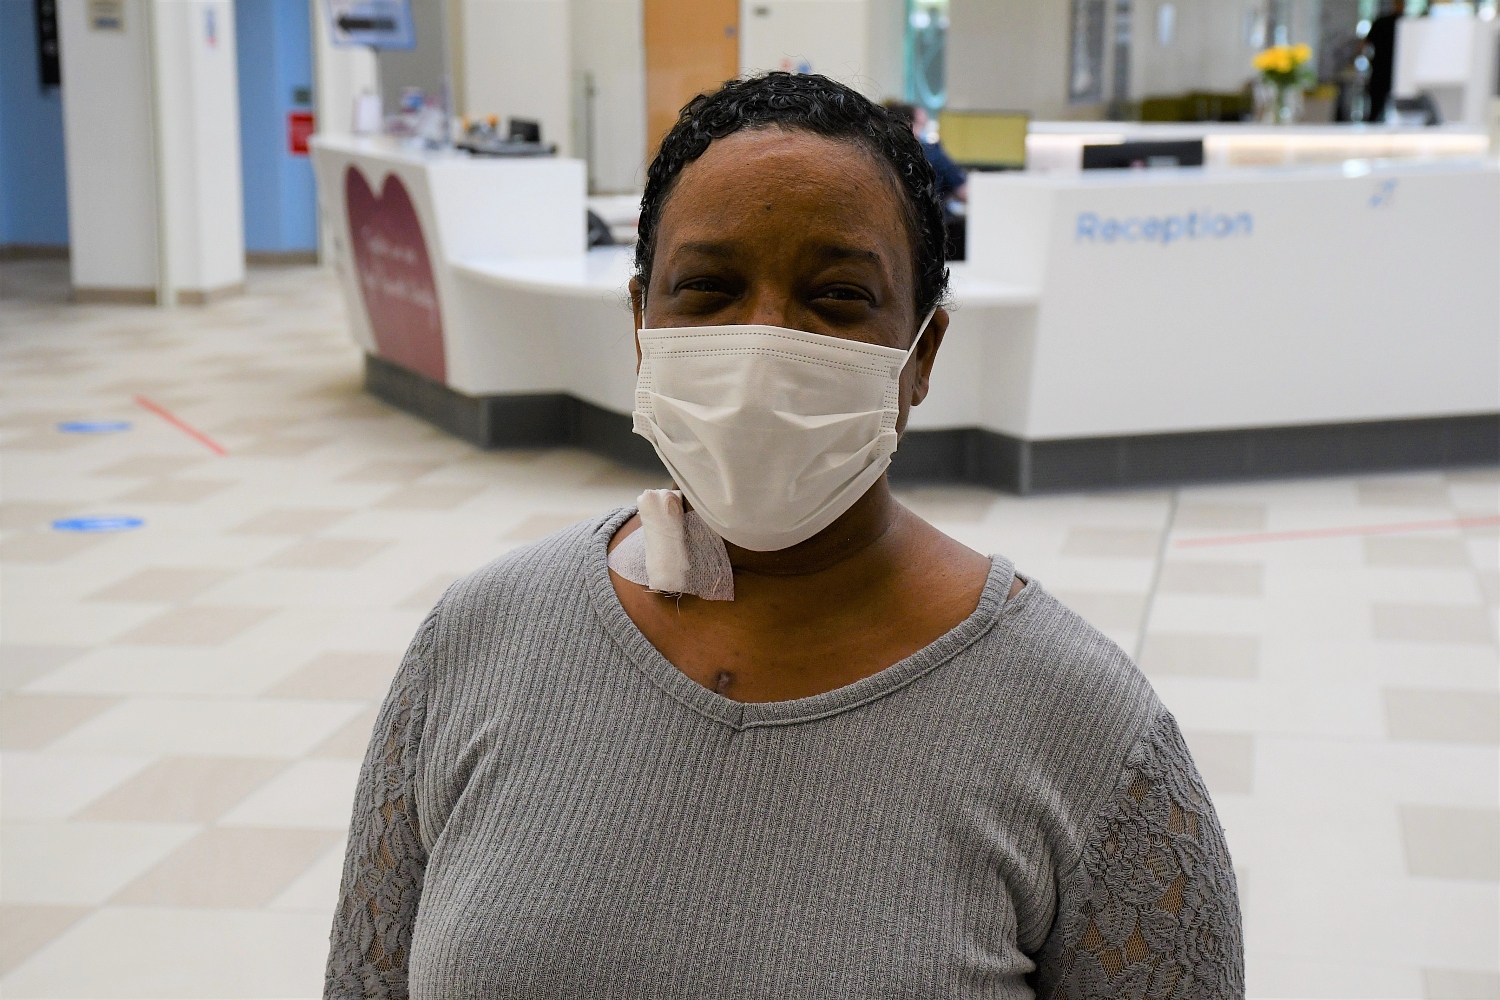 A woman with a mask smiles. In the background is a reception desk.